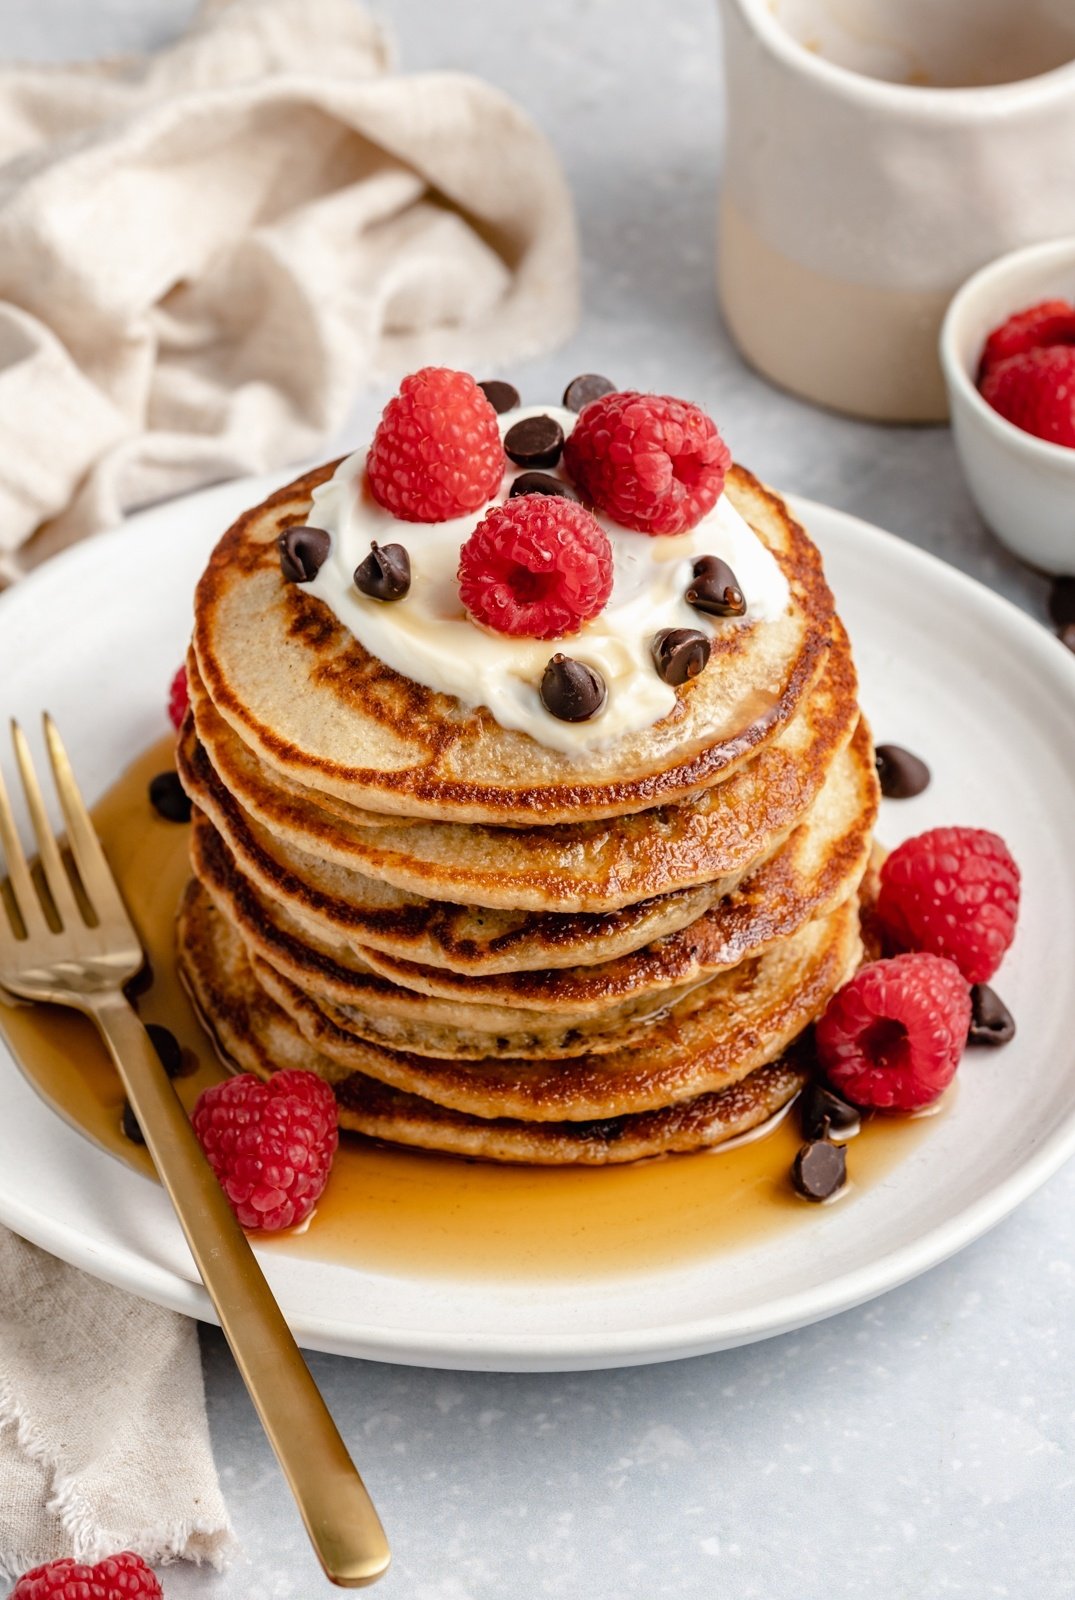 From Scratch to Stack: Perfecting Your Buttermilk Pancakes Recipe